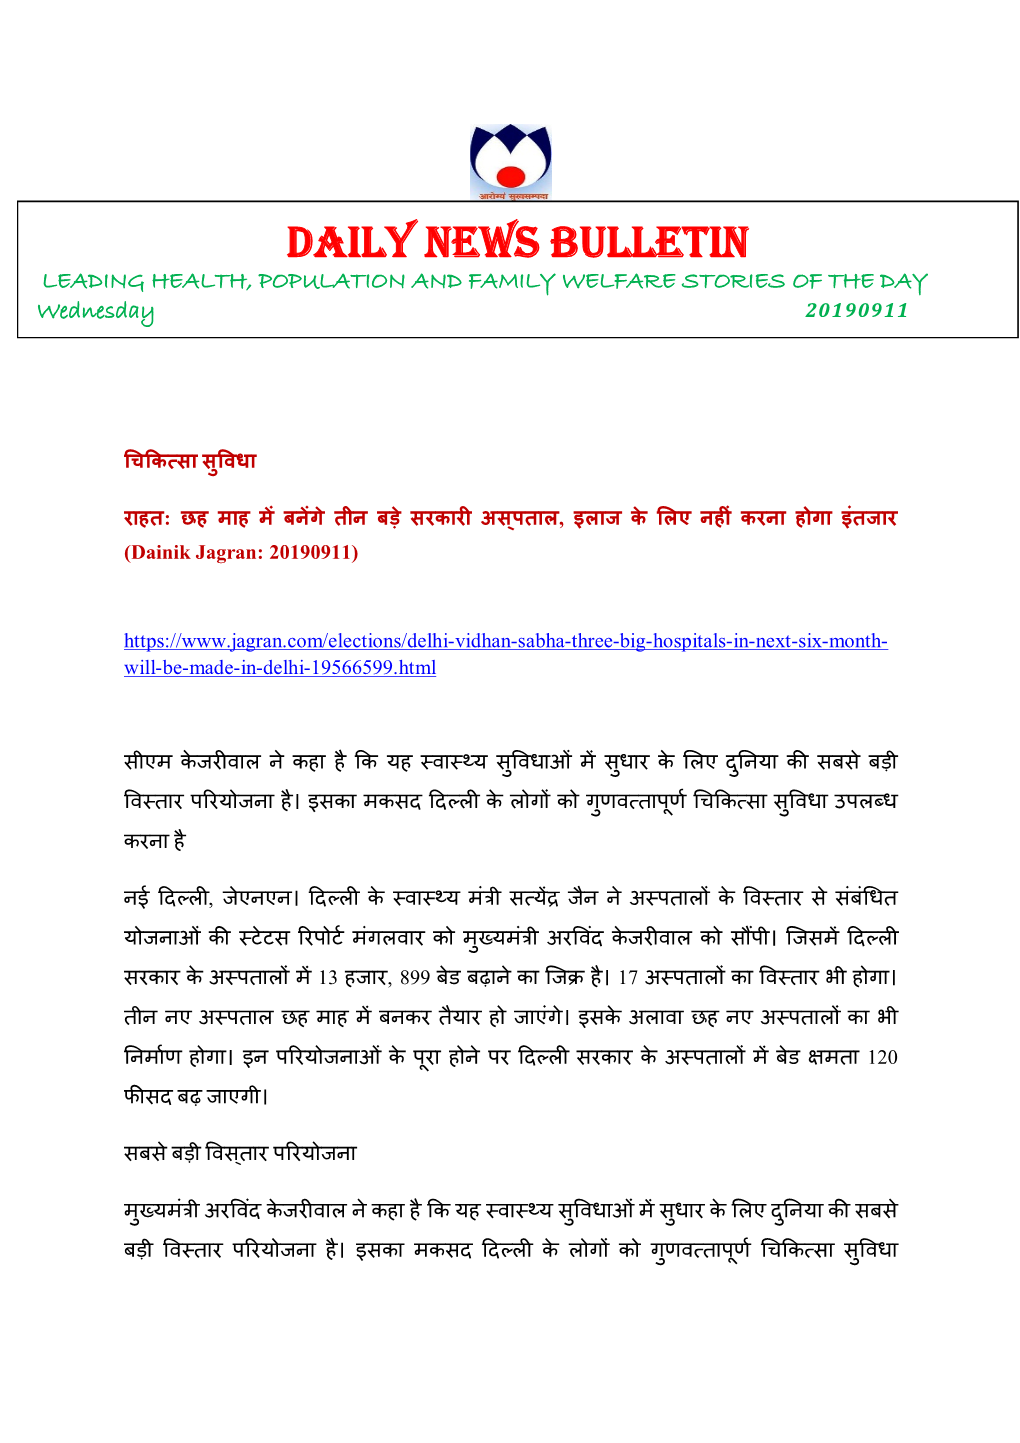 DAILY NEWS BULLETIN LEADING HEALTH, POPULATION and FAMILY WELFARE STORIES of the DAY 20190911 Wednesday